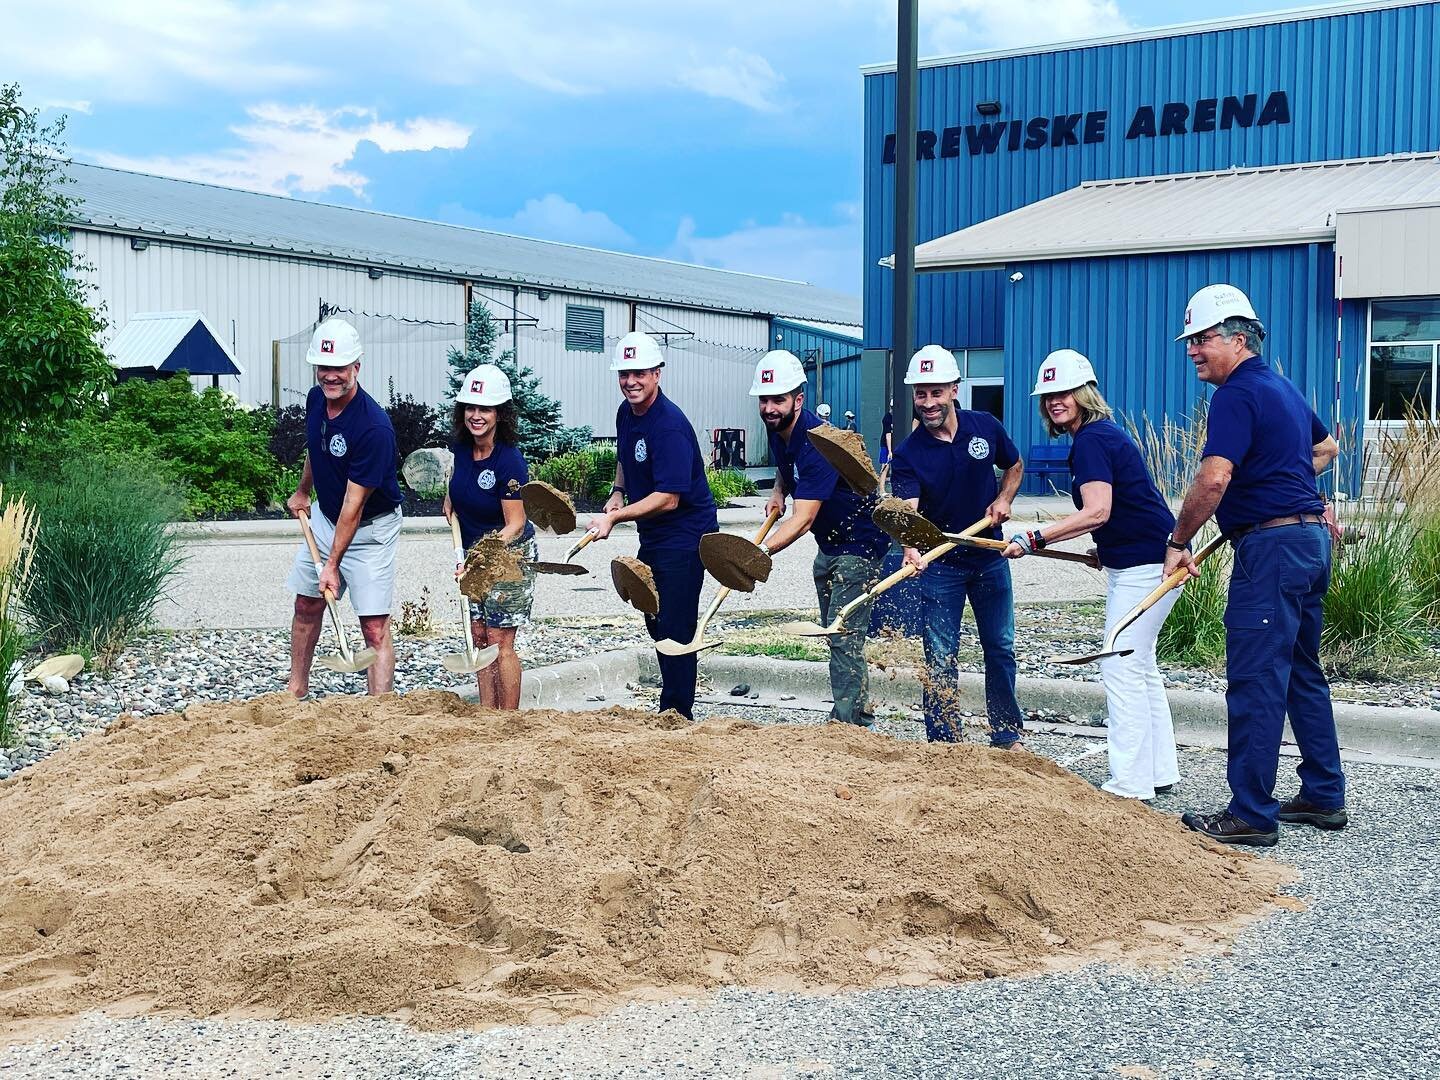 Congratulations to @hudsonhockeywi! Despite some inclement weather they were able to break ground on their exciting new facility! #WeAreStudioEA #hockeydesign #sustainabledesign #groundbreakingceremony #hockey #hudsonhockey